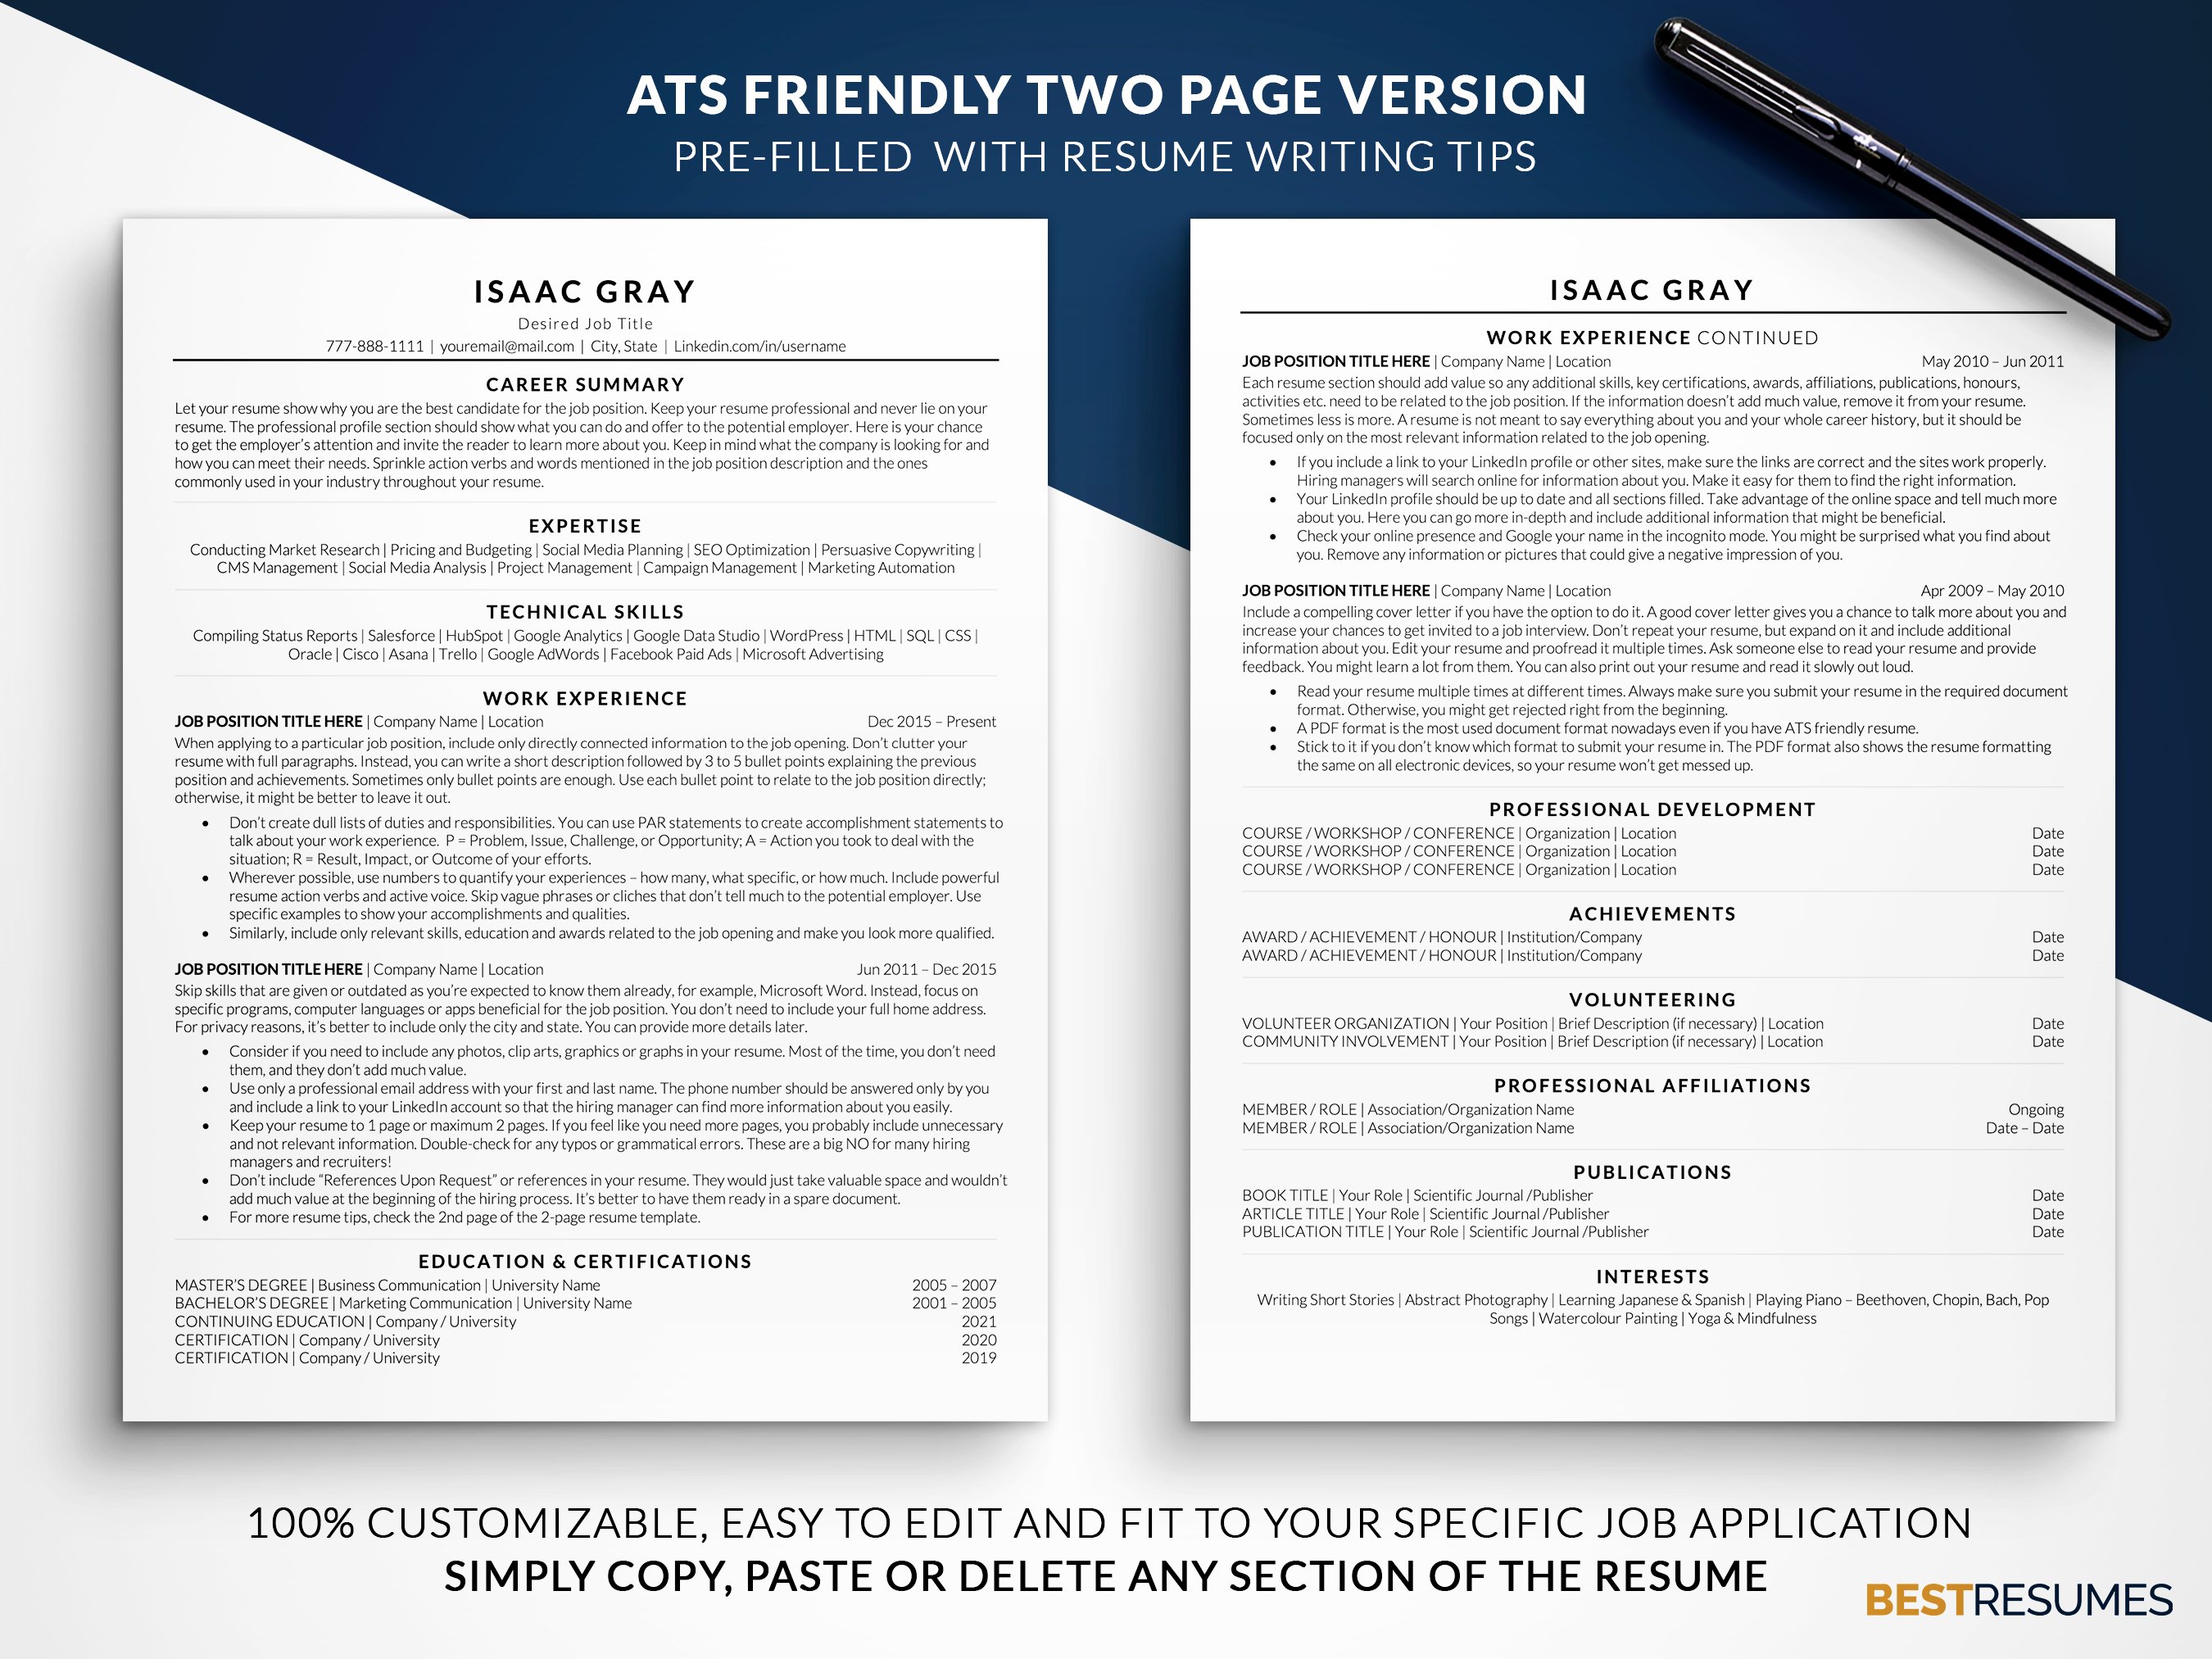 ats resume template word two page resume isaac gray 309